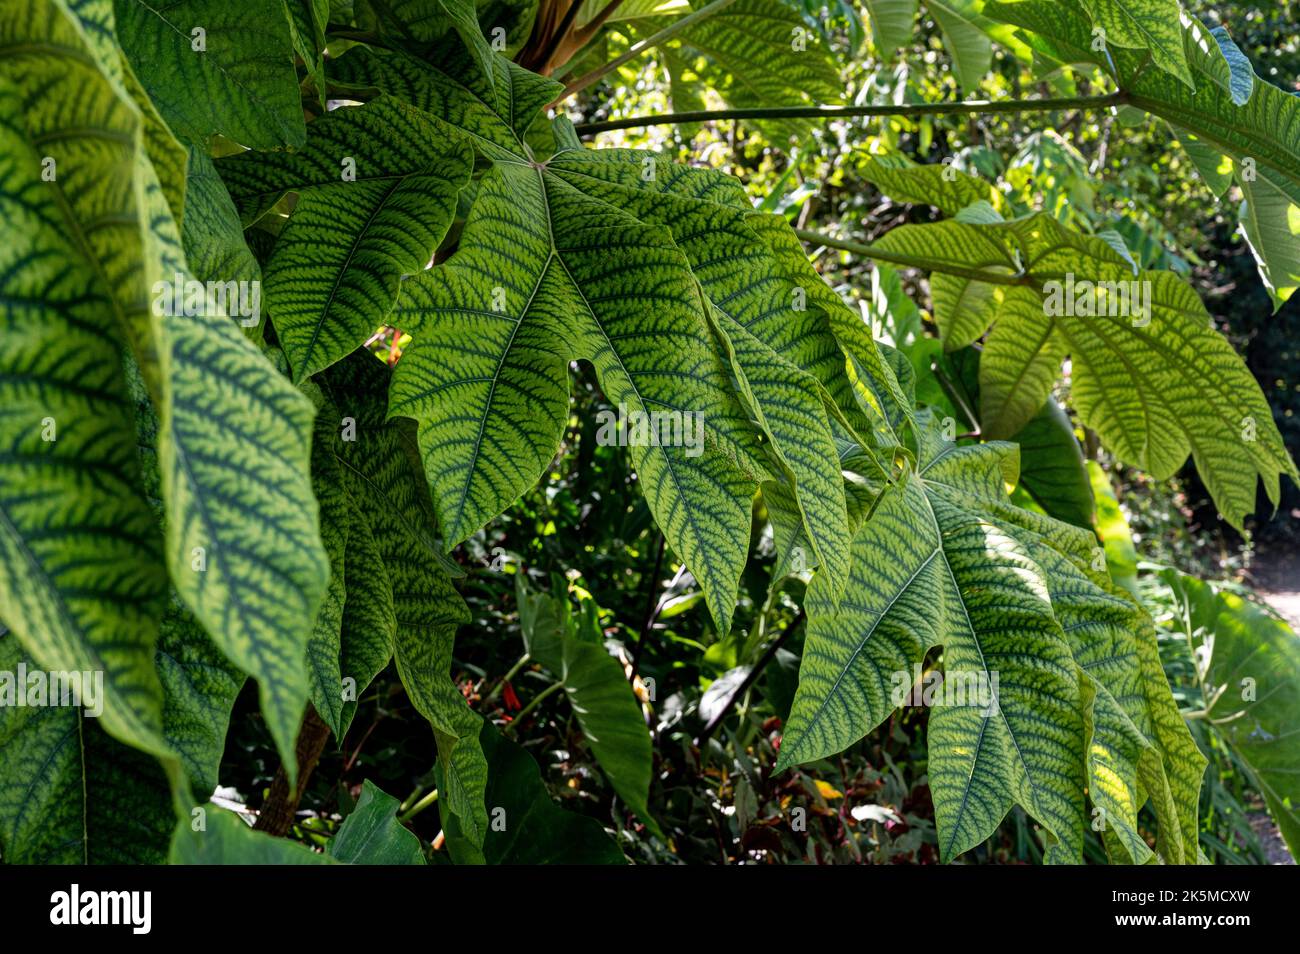 Tetrapanax papyrifer Rex, Chinese rice-paper plant Rex, Araliaceae. Large veined green leafed plant. Stock Photo